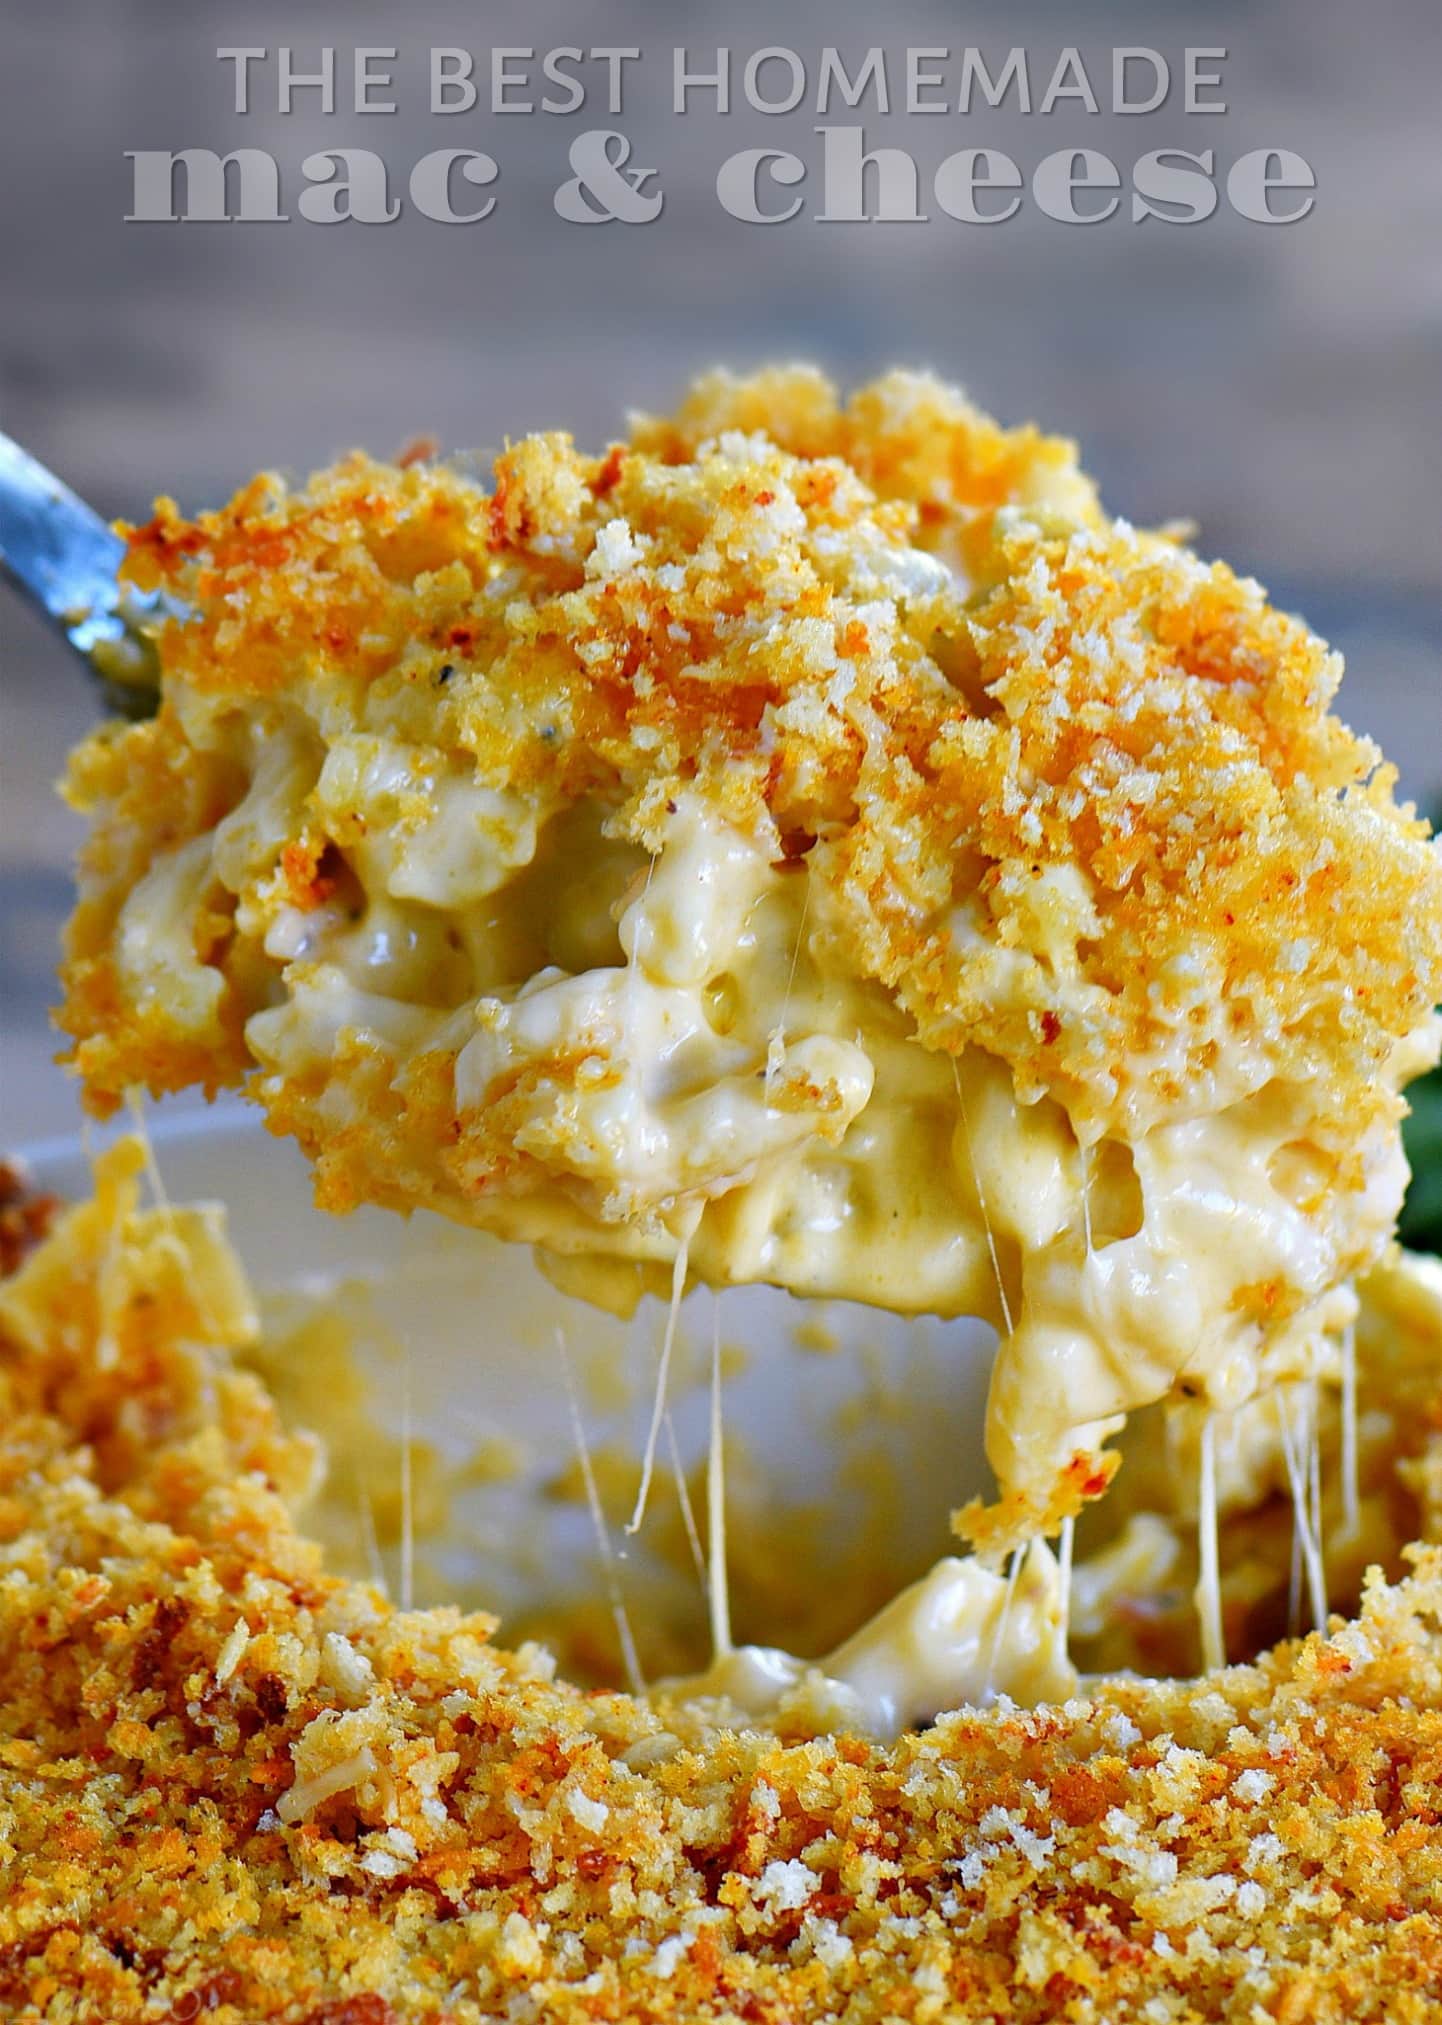 Baked Macaroni And Cheese Recipe